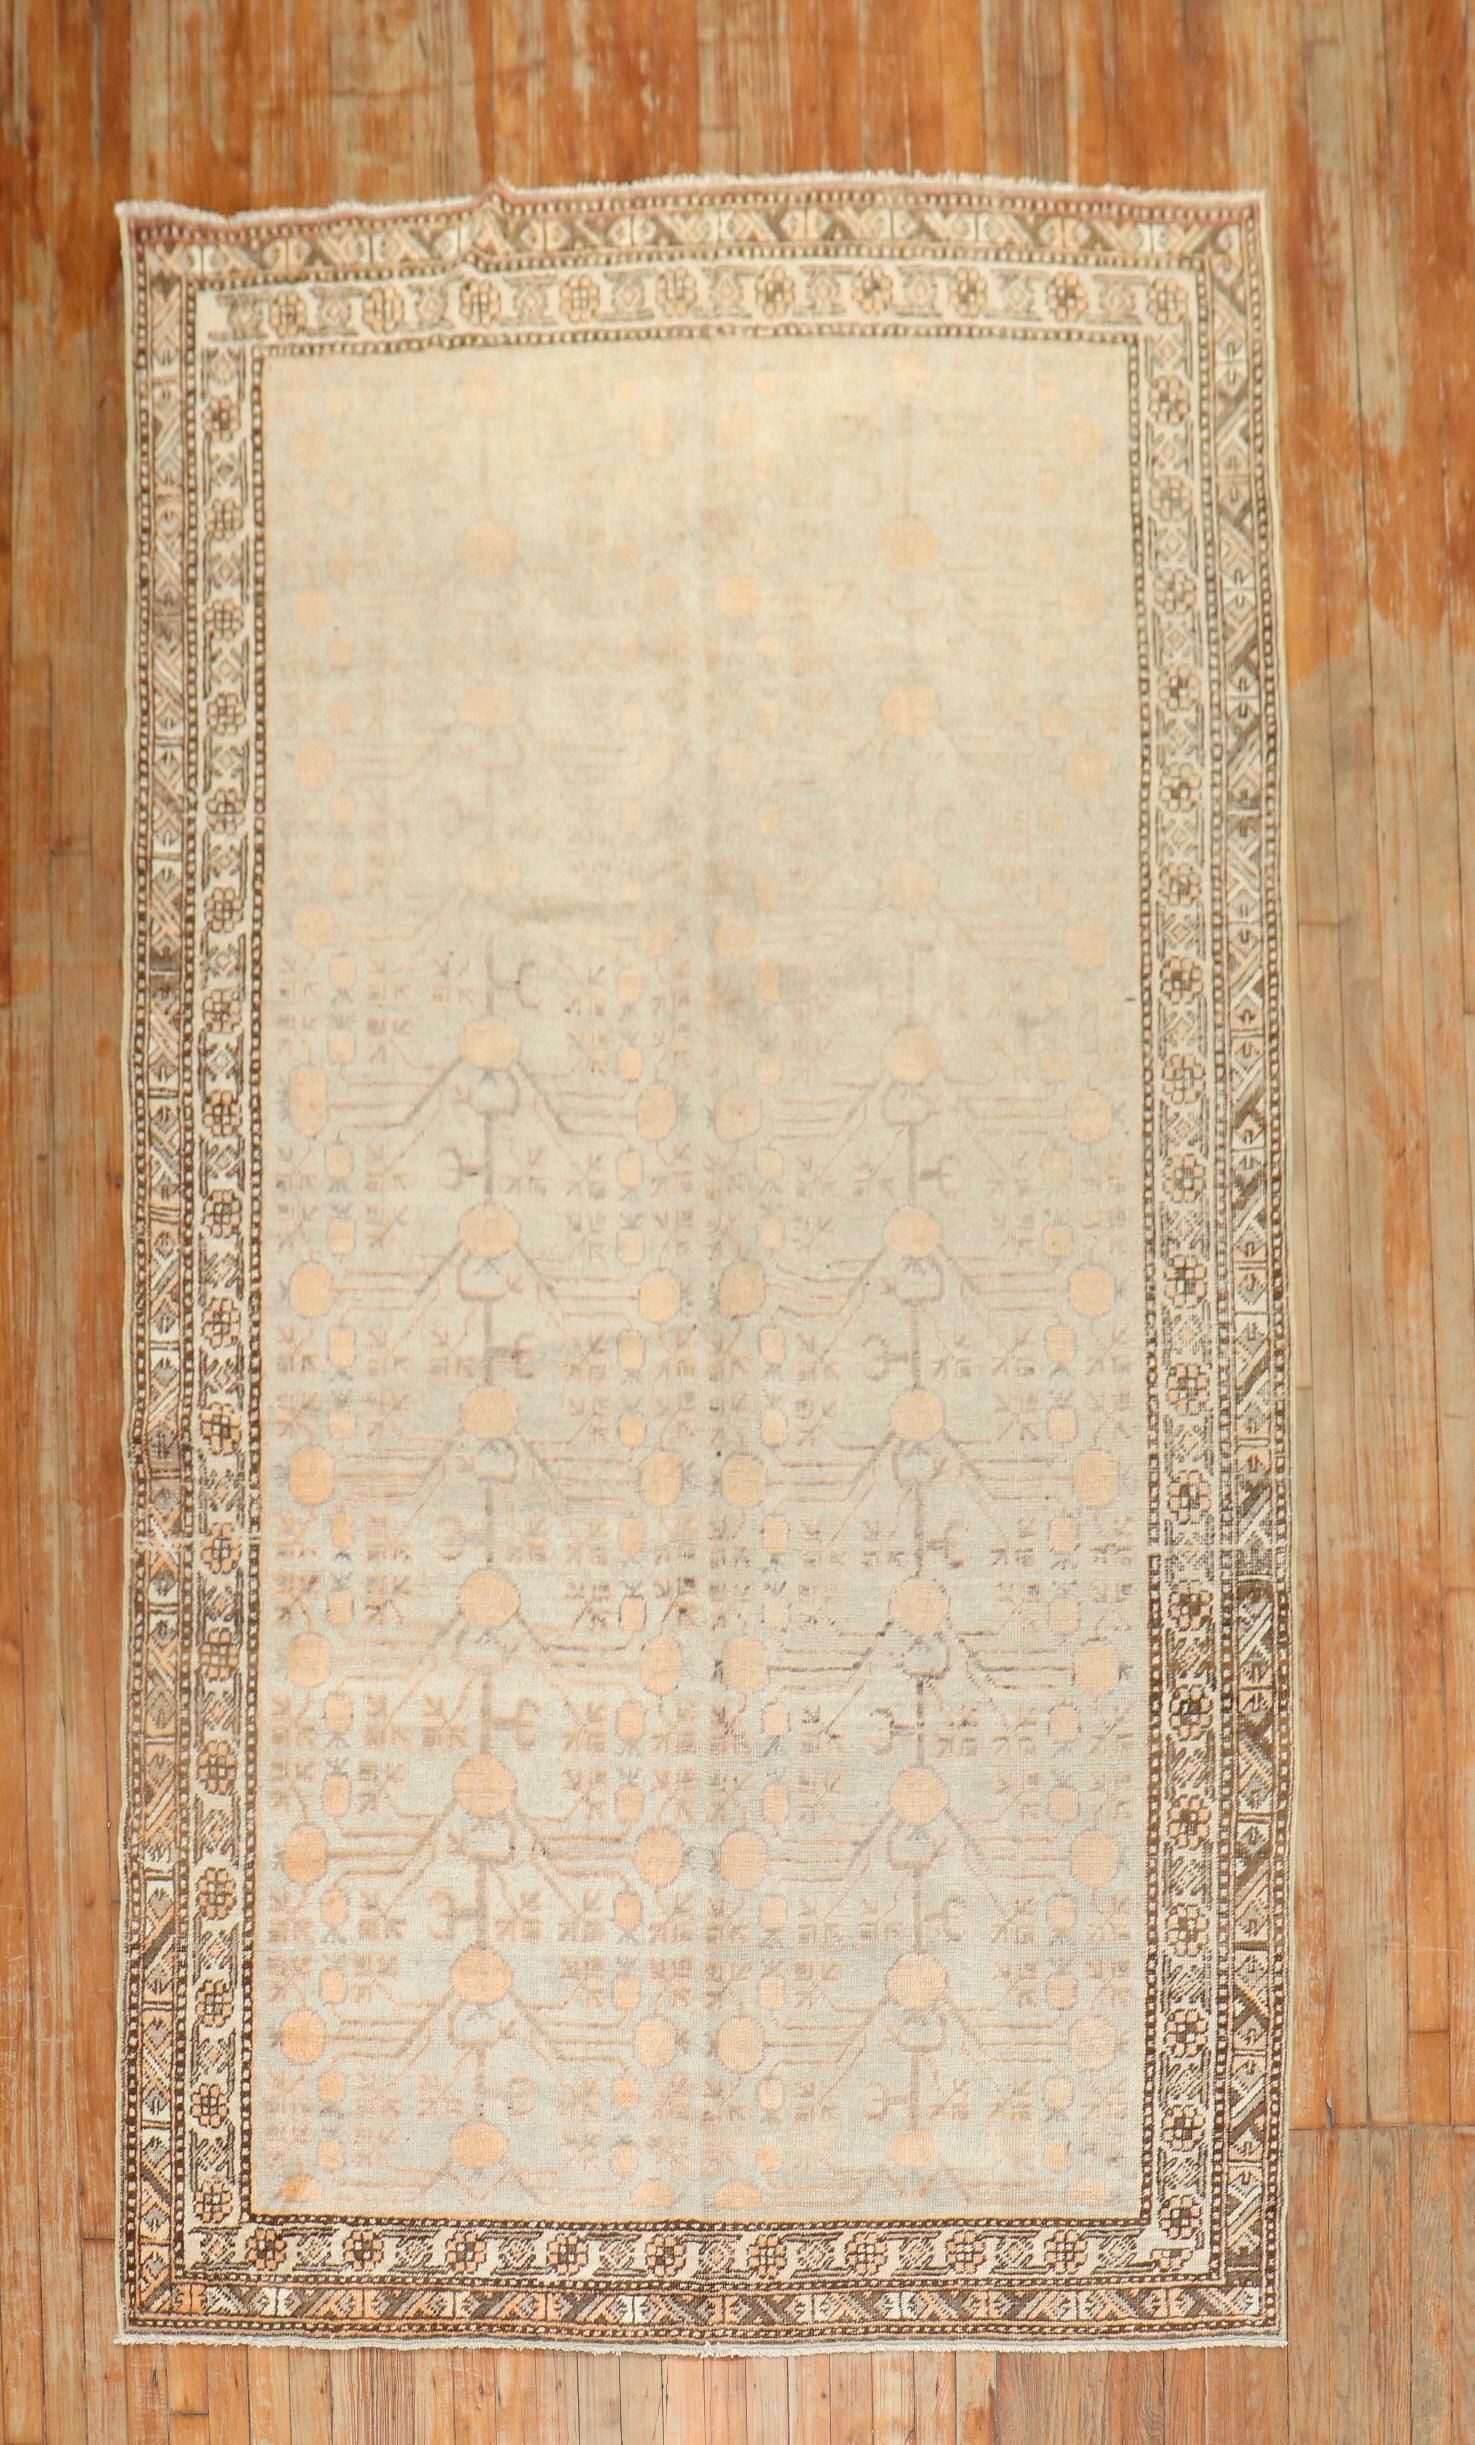 Early 20th century antique Khotan rug with a peach tone pomegranate motif on a light celadon green field

Measures: 5'5'' x 10'3''.